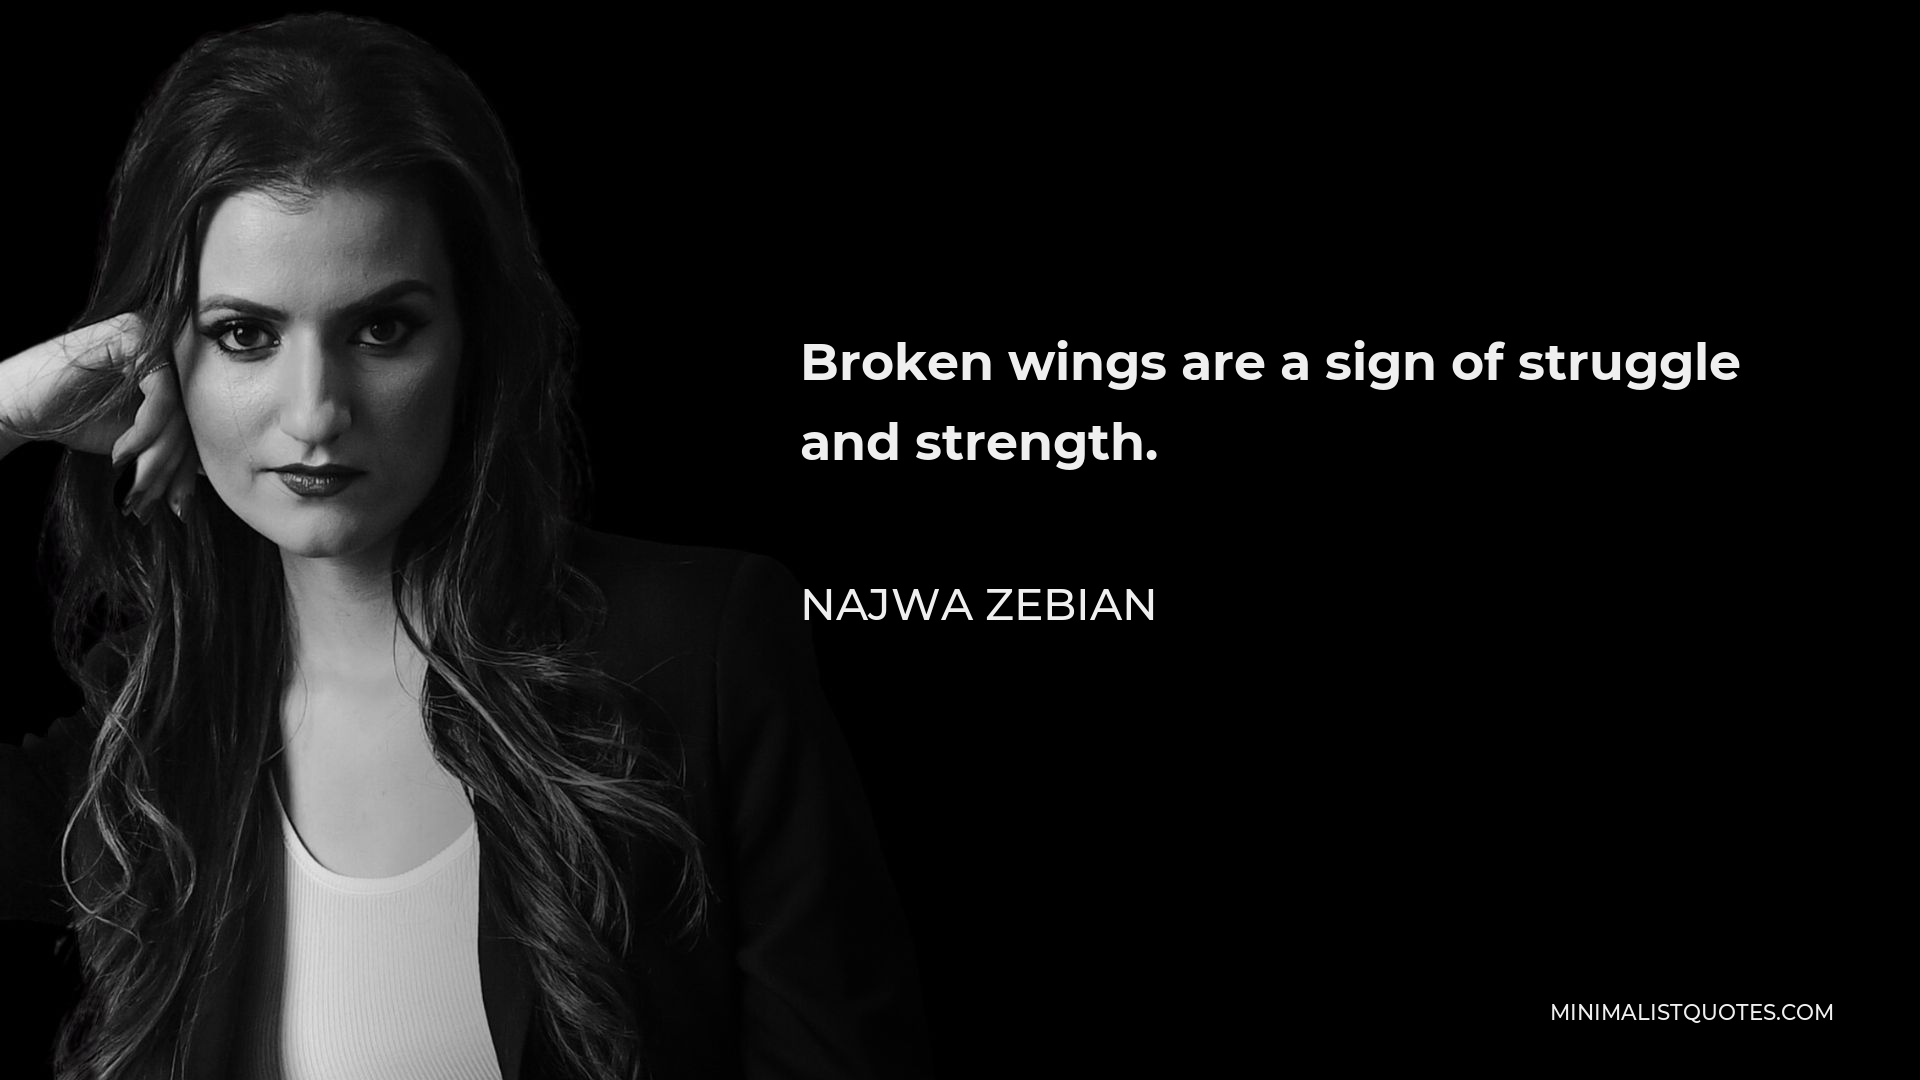 Najwa Zebian Quote - Broken wings are a sign of struggle and strength.